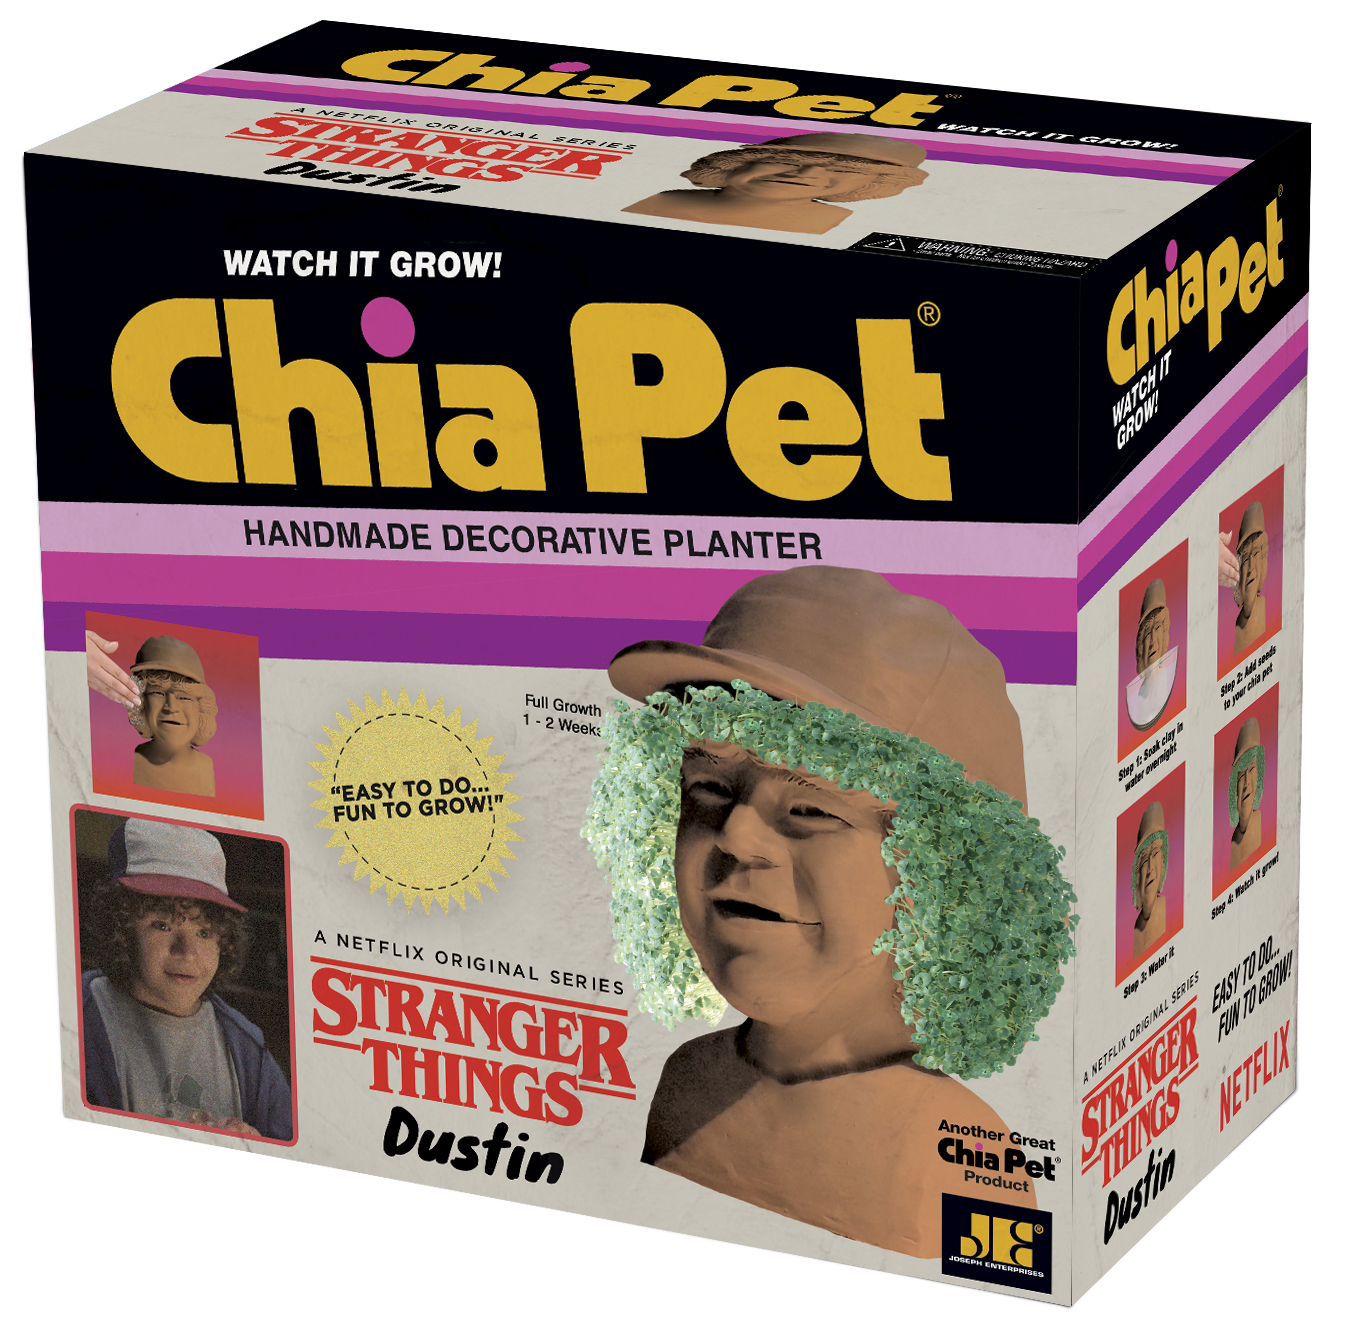 Chia Pet Dustin from Stranger Things Decorative Pottery Planter, Easy to Do and Fun to Grow, Novelty Gift As Seen on TV